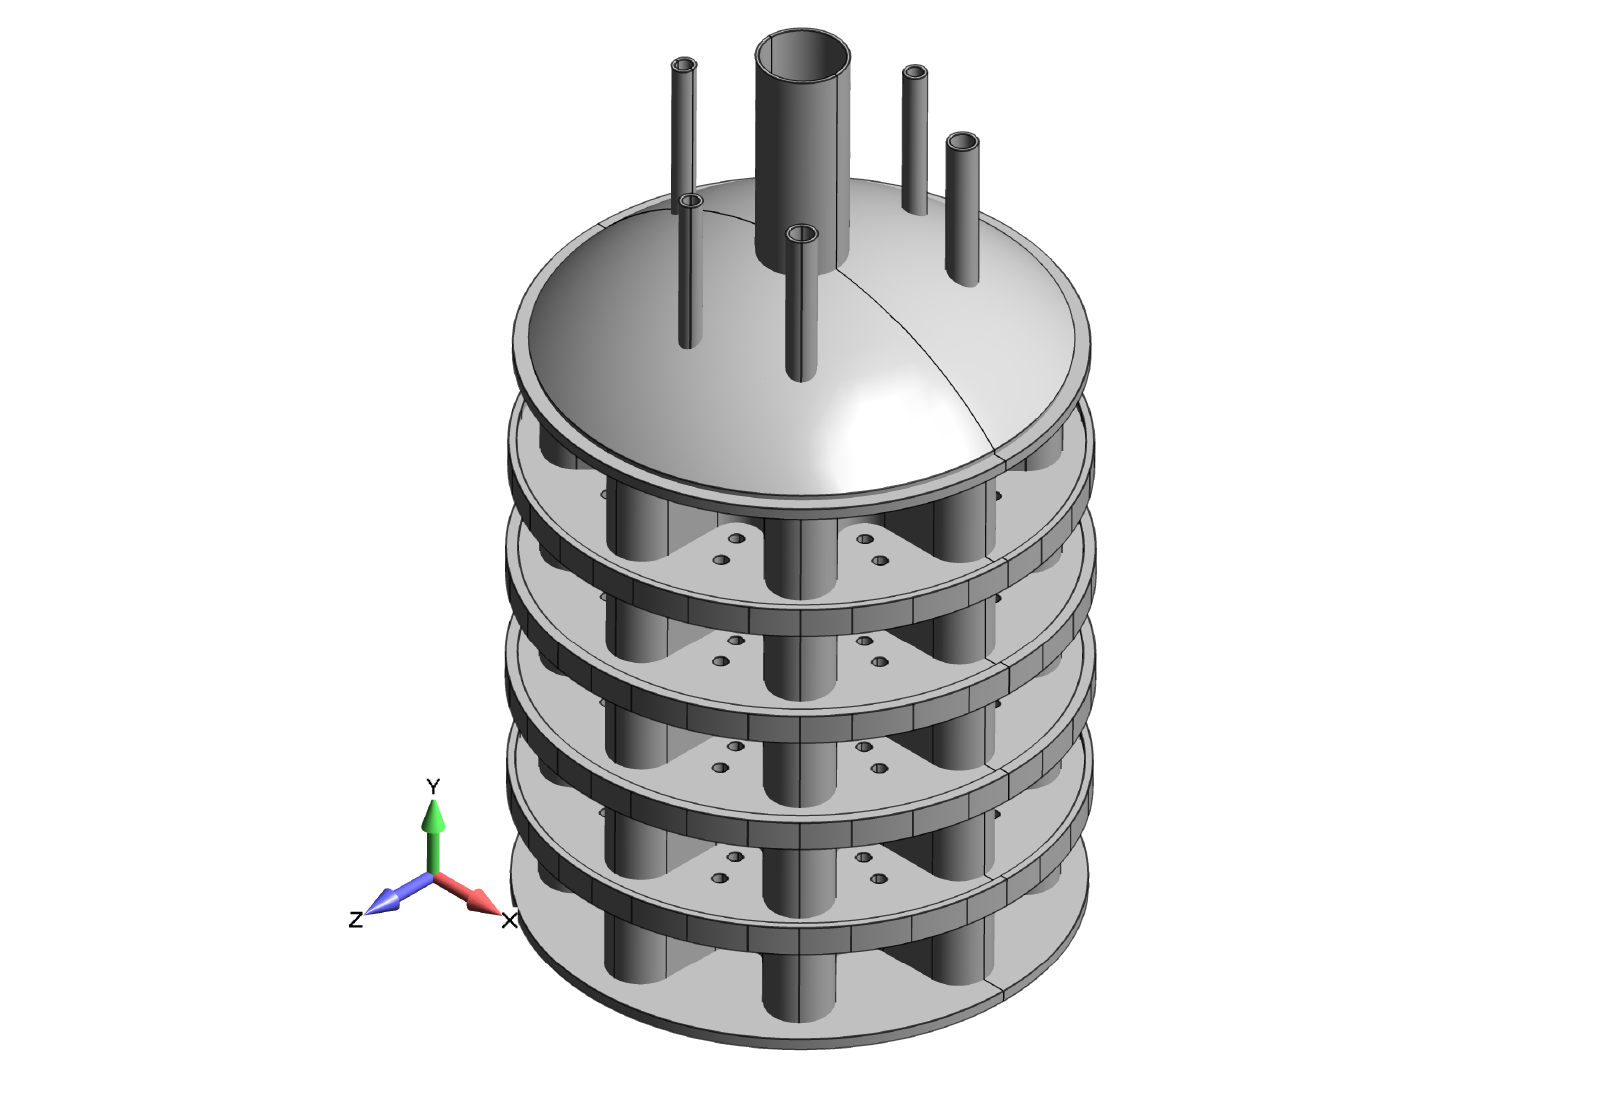 Figure 2: Final vessel design as a collection of surfaces ready for FEA plate meshing